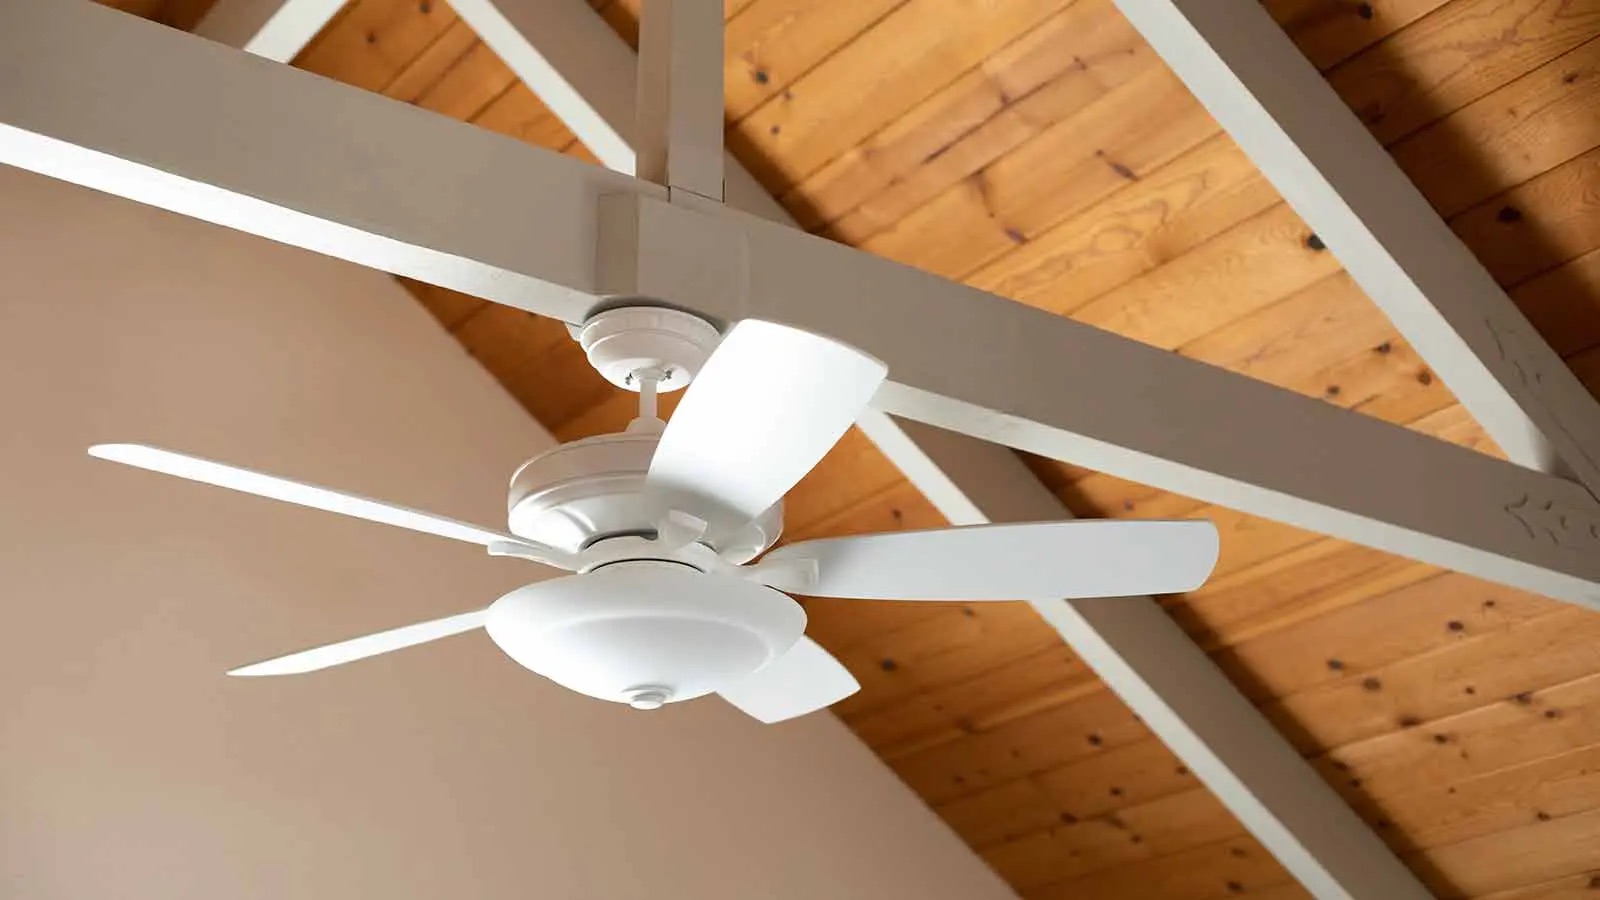 Change Your Ceiling Fan Direction For Summer For A Cooler Home